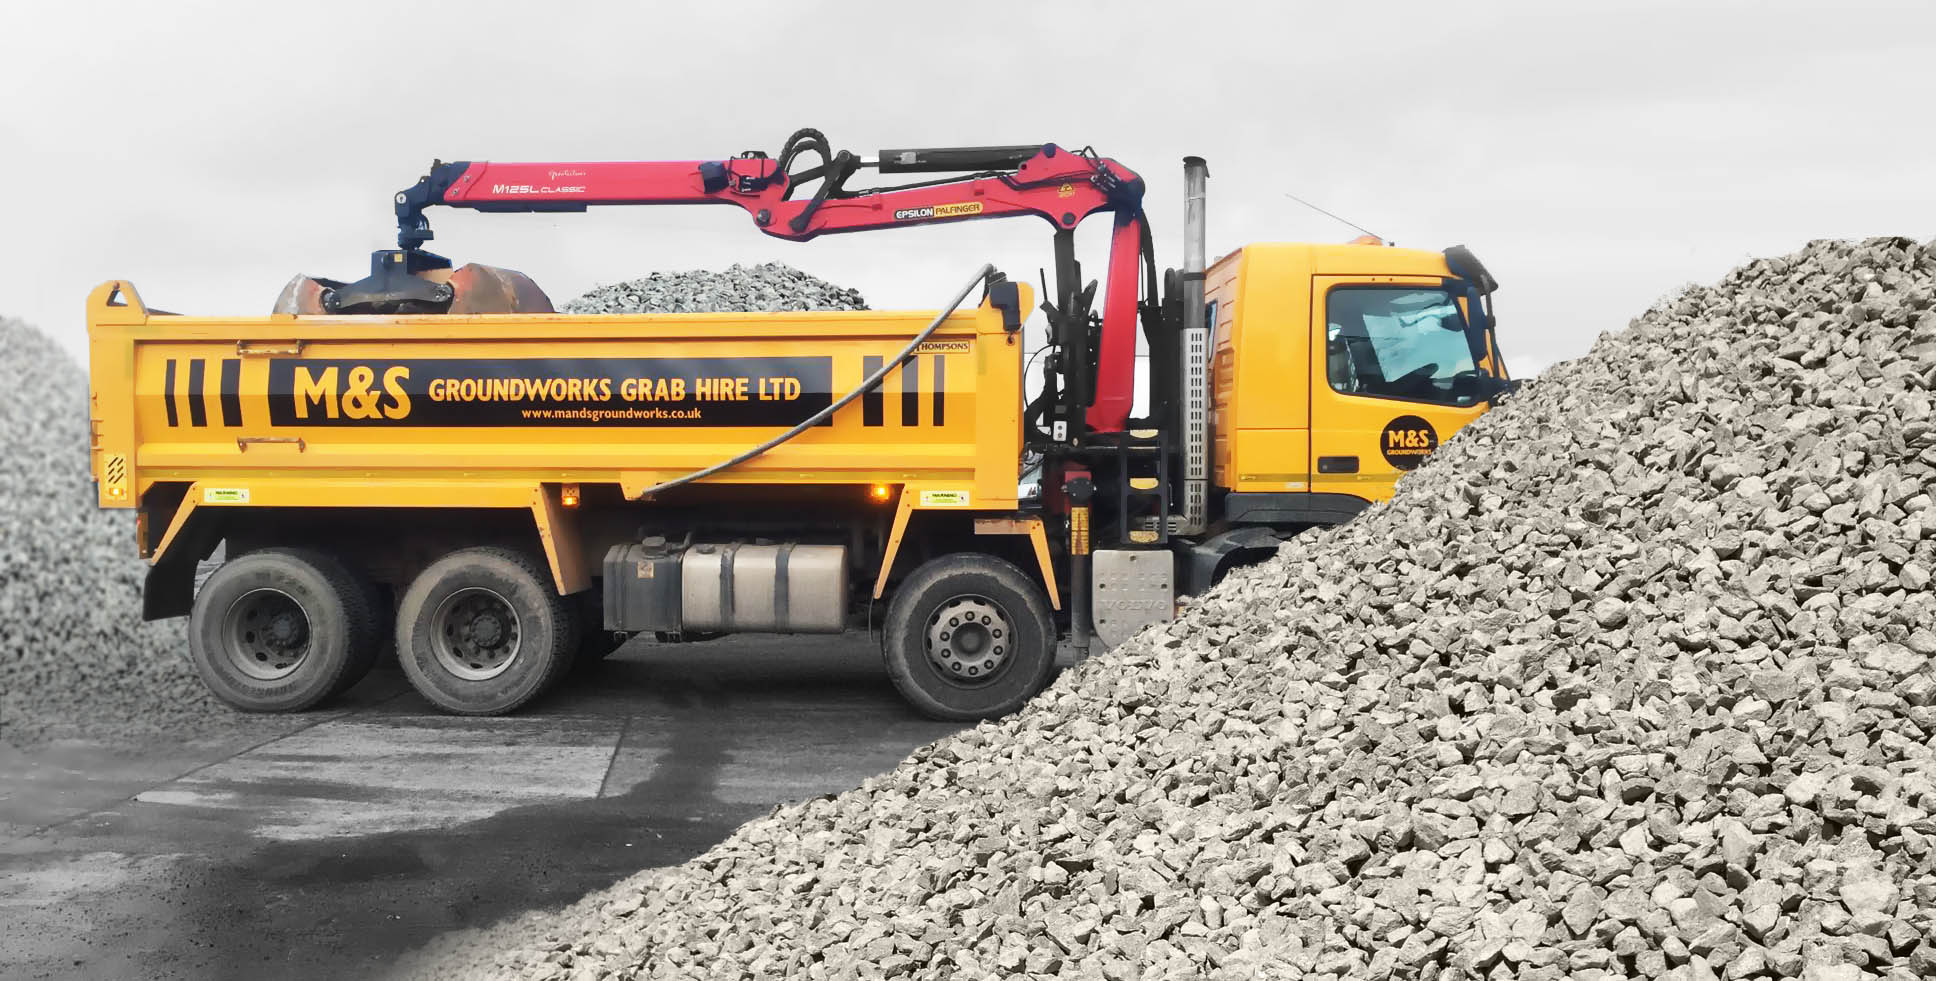 Professional Aggregate Suppliers Goring, RG8